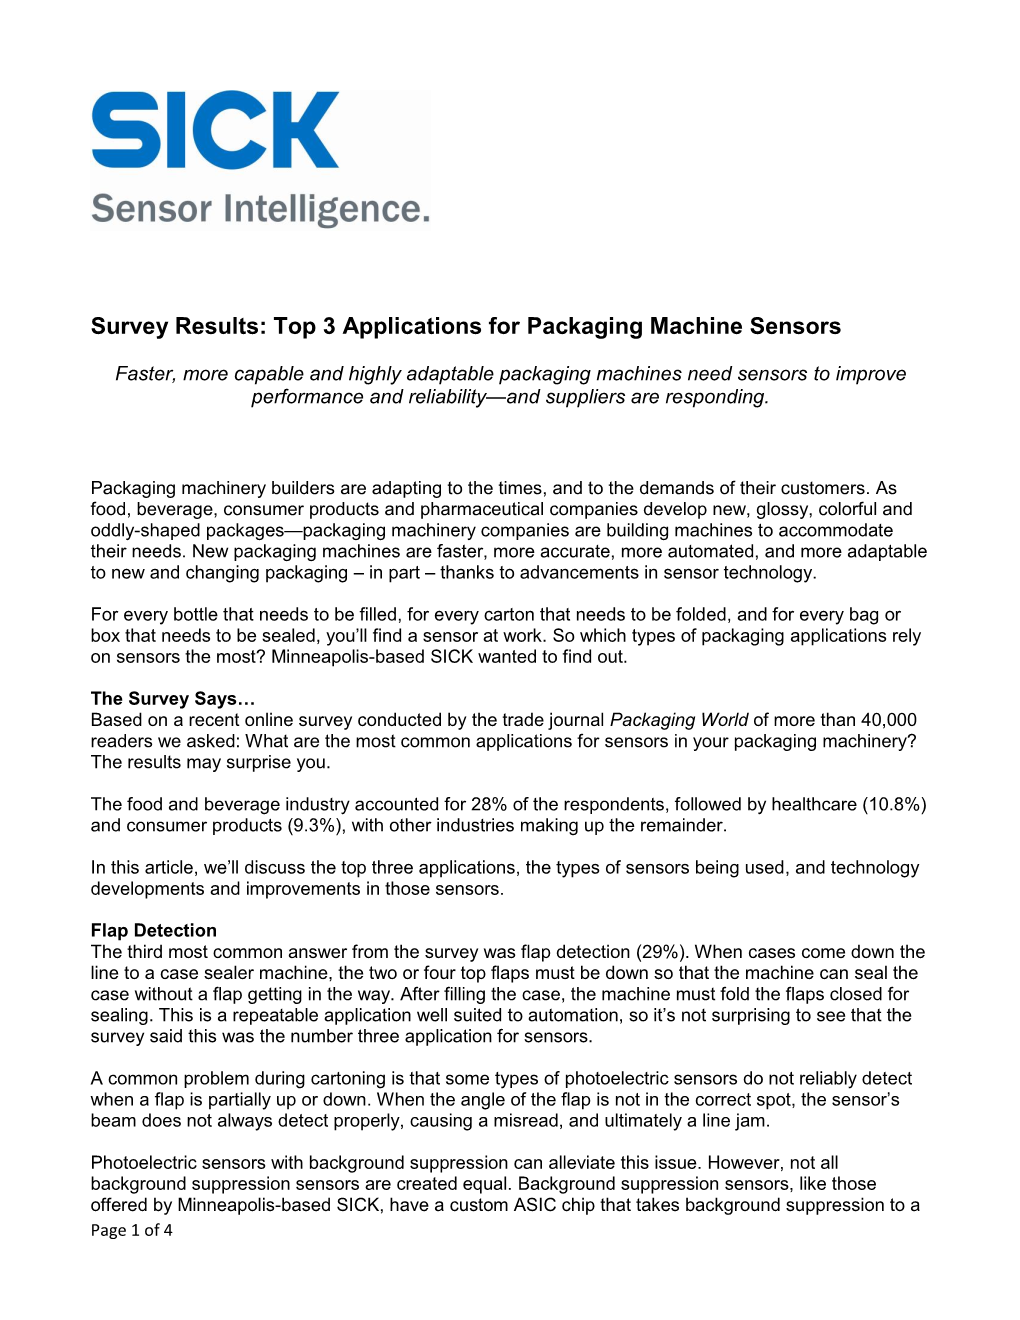 Survey Results: Top 3 Applications for Packaging Machine Sensors